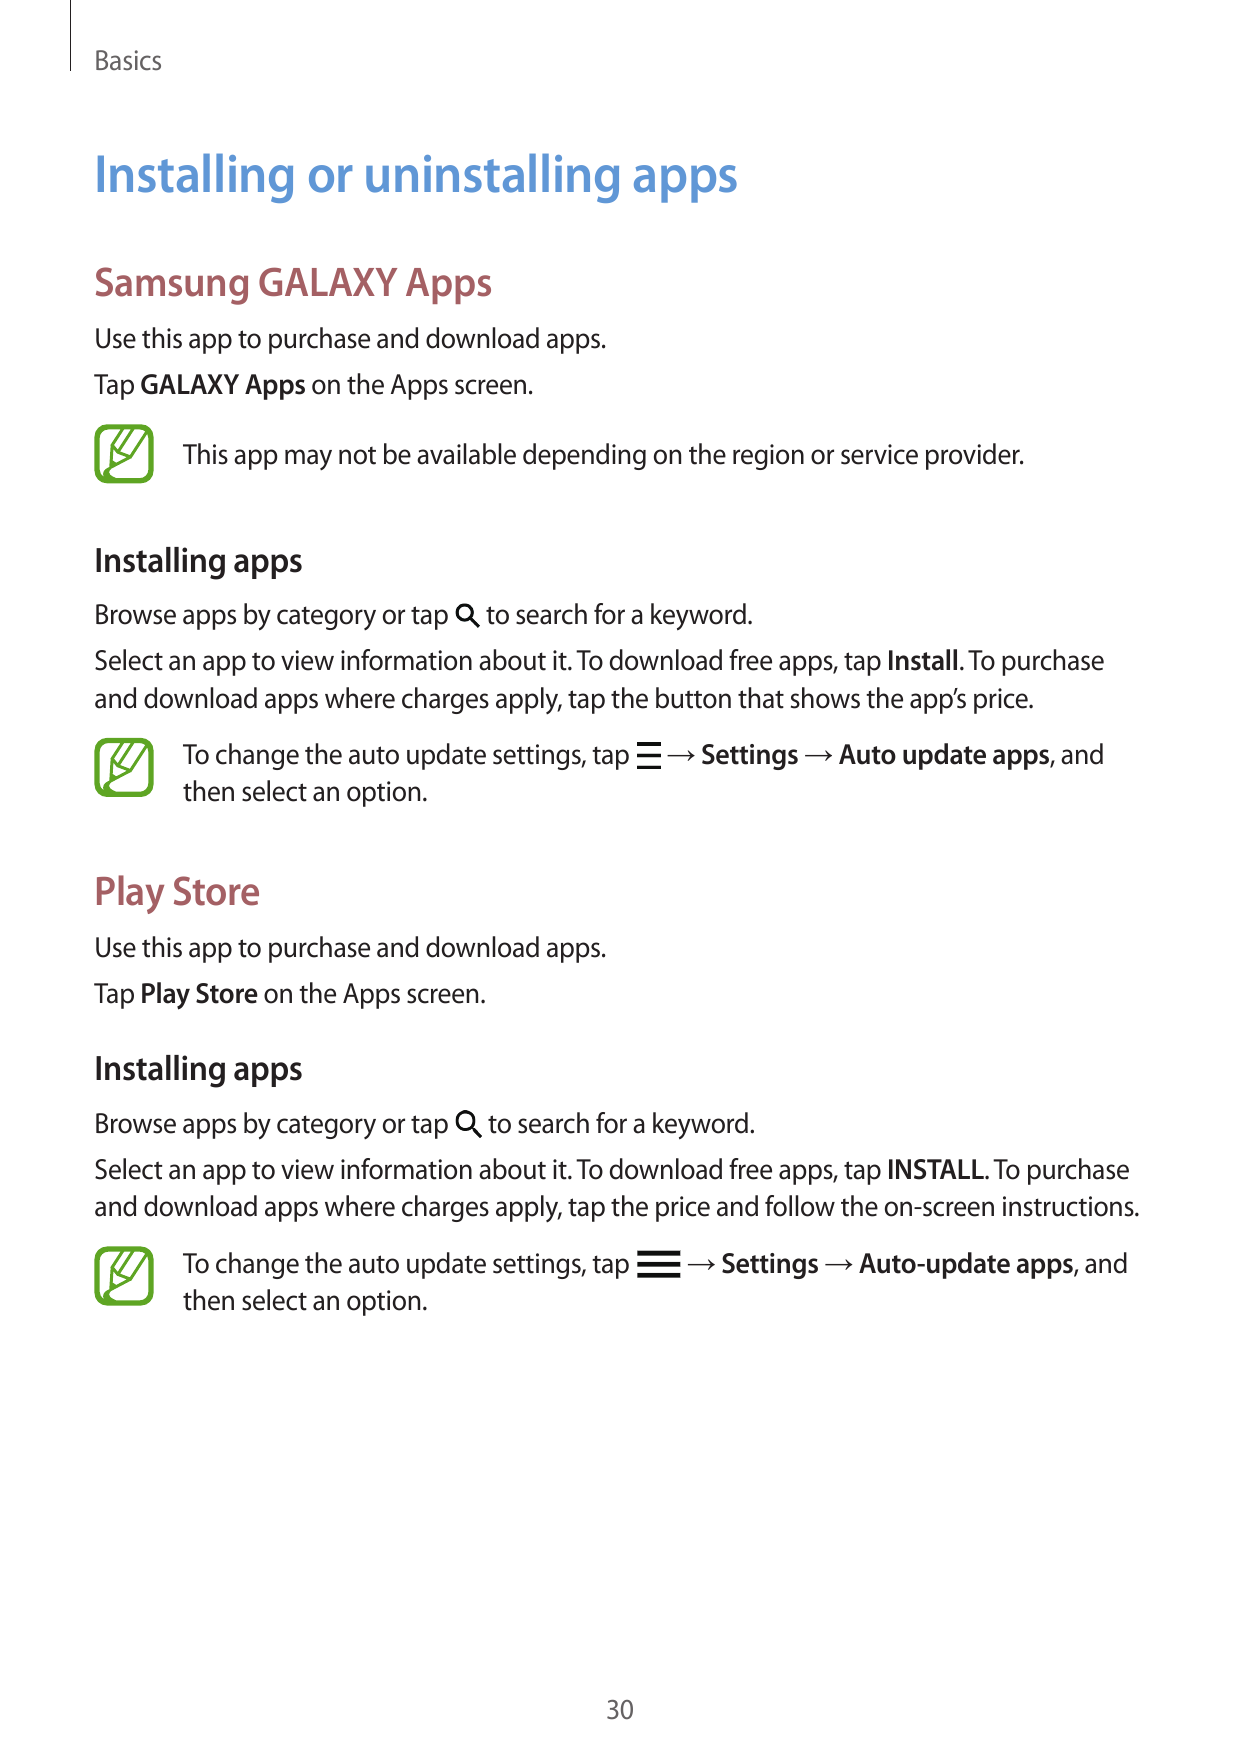 BasicsInstalling or uninstalling appsSamsung GALAXY AppsUse this app to purchase and download apps.Tap GALAXY Apps on the Apps s